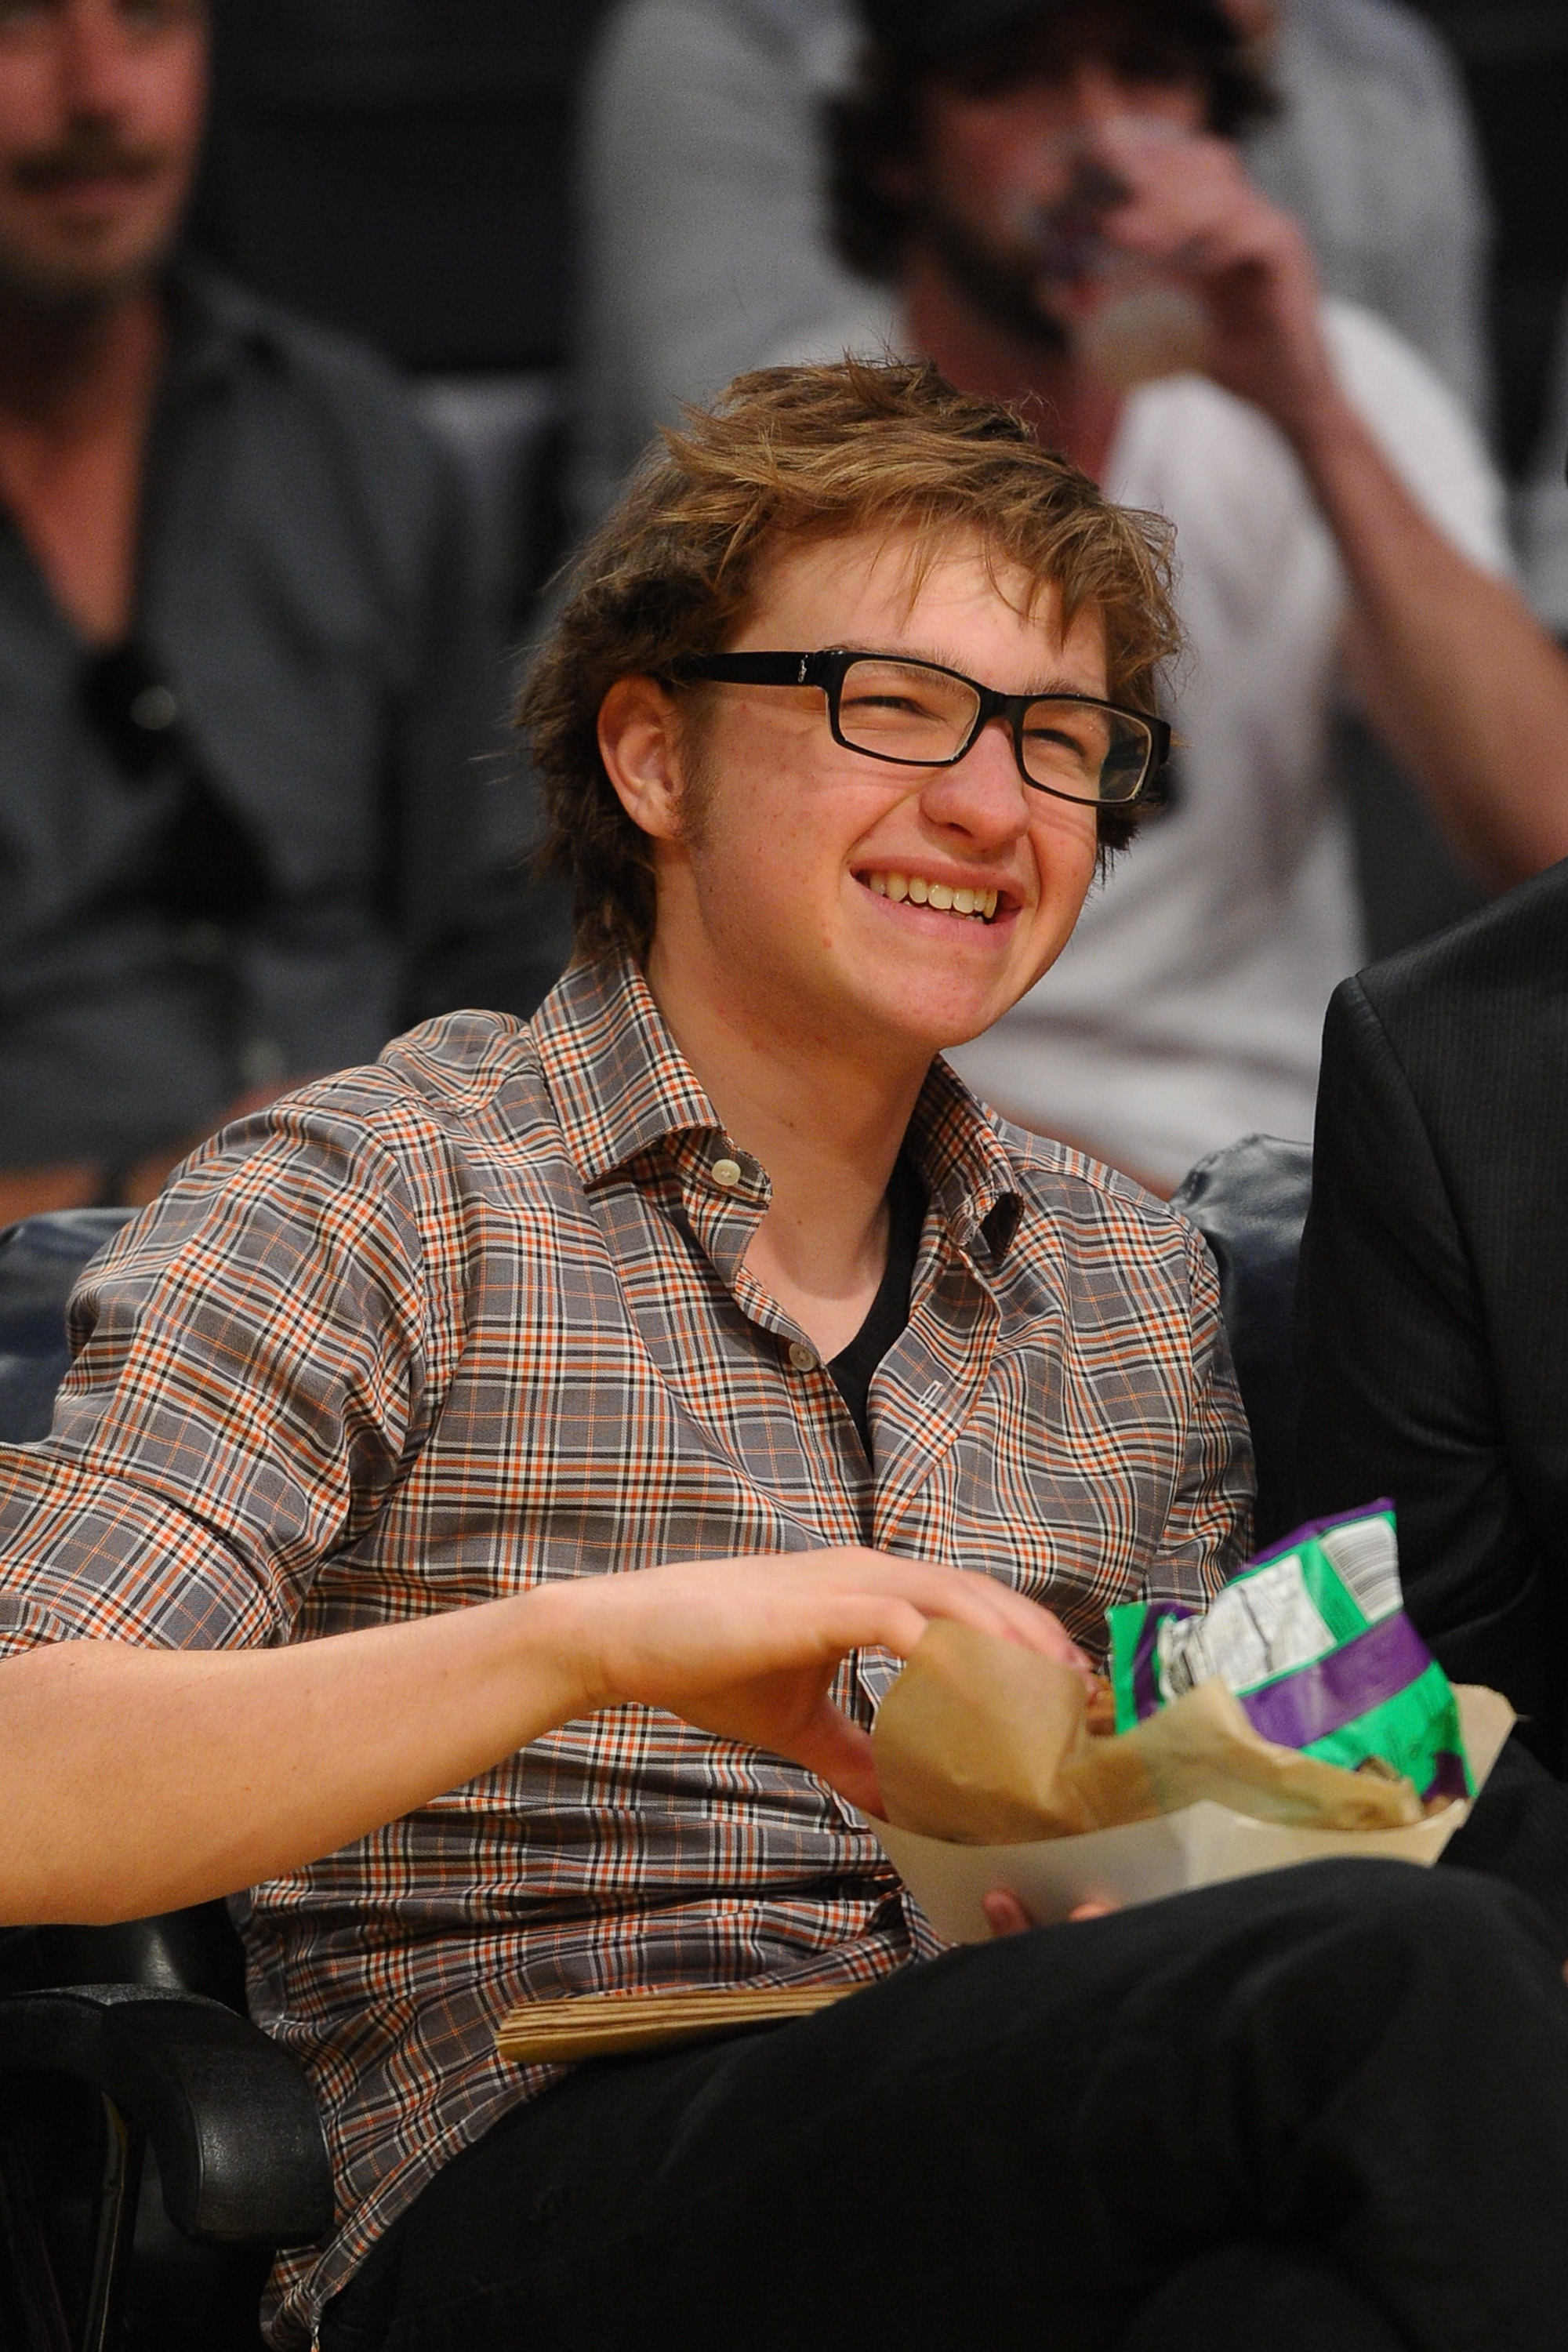 Angus T. Jones at a basketball game in Los Angeles in 2011 | Source: Getty Images